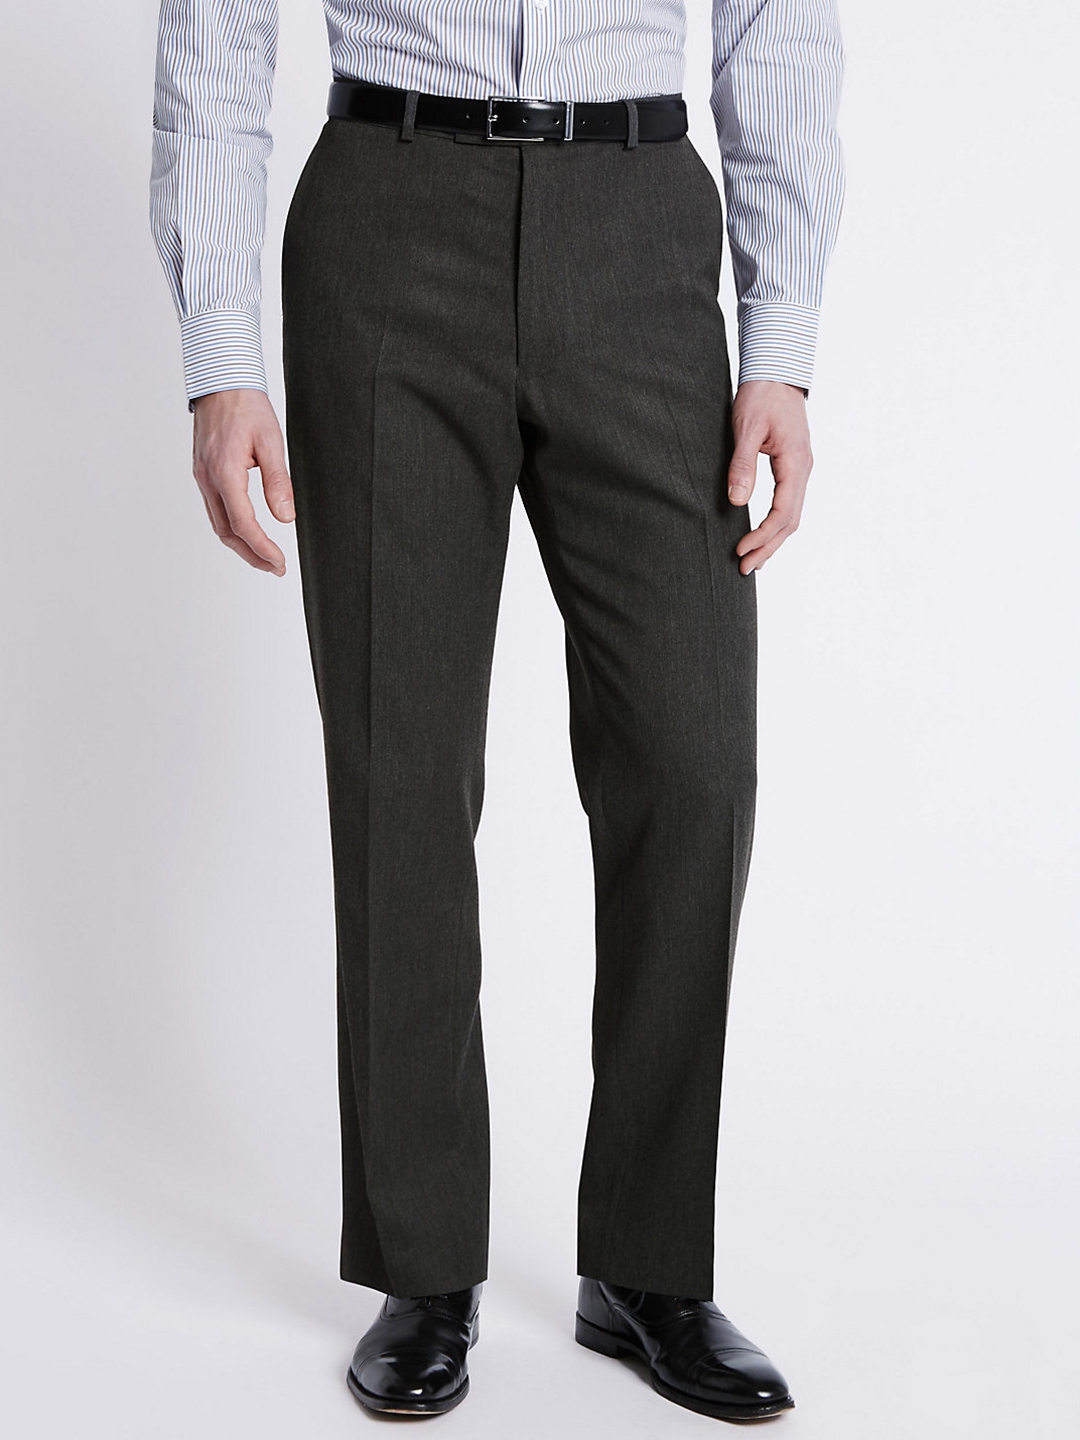 Charcoal Grey Suit Trousers for Men  Fursac P3VOXAAC0822